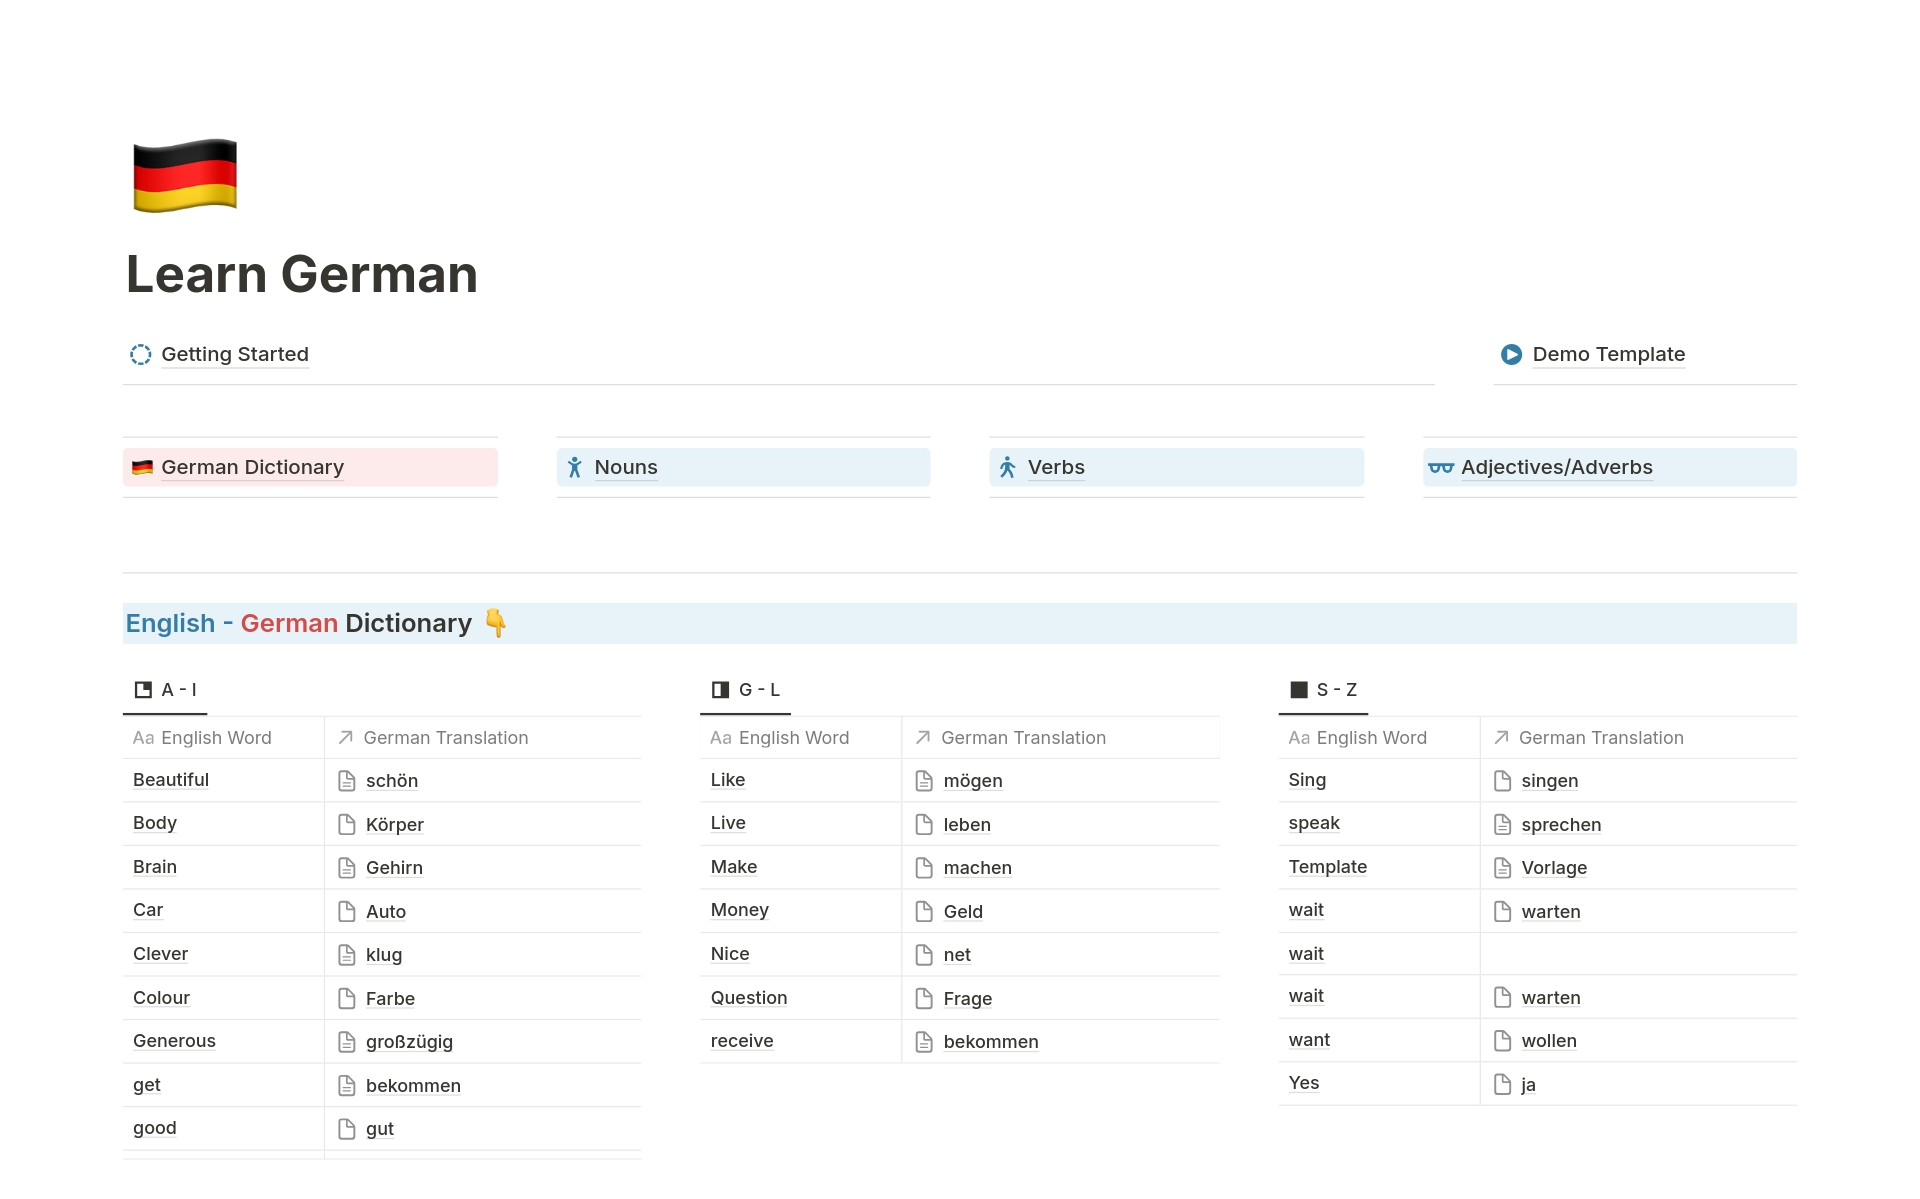 A German Language learning assistant to help you track your learning progress. The template promotes your learning and practice by enabling you to; 
Create a comprehensive dictionary of all words you learn, 
Conjugate verbs
Document plurals.
Explore words by parts of speech.